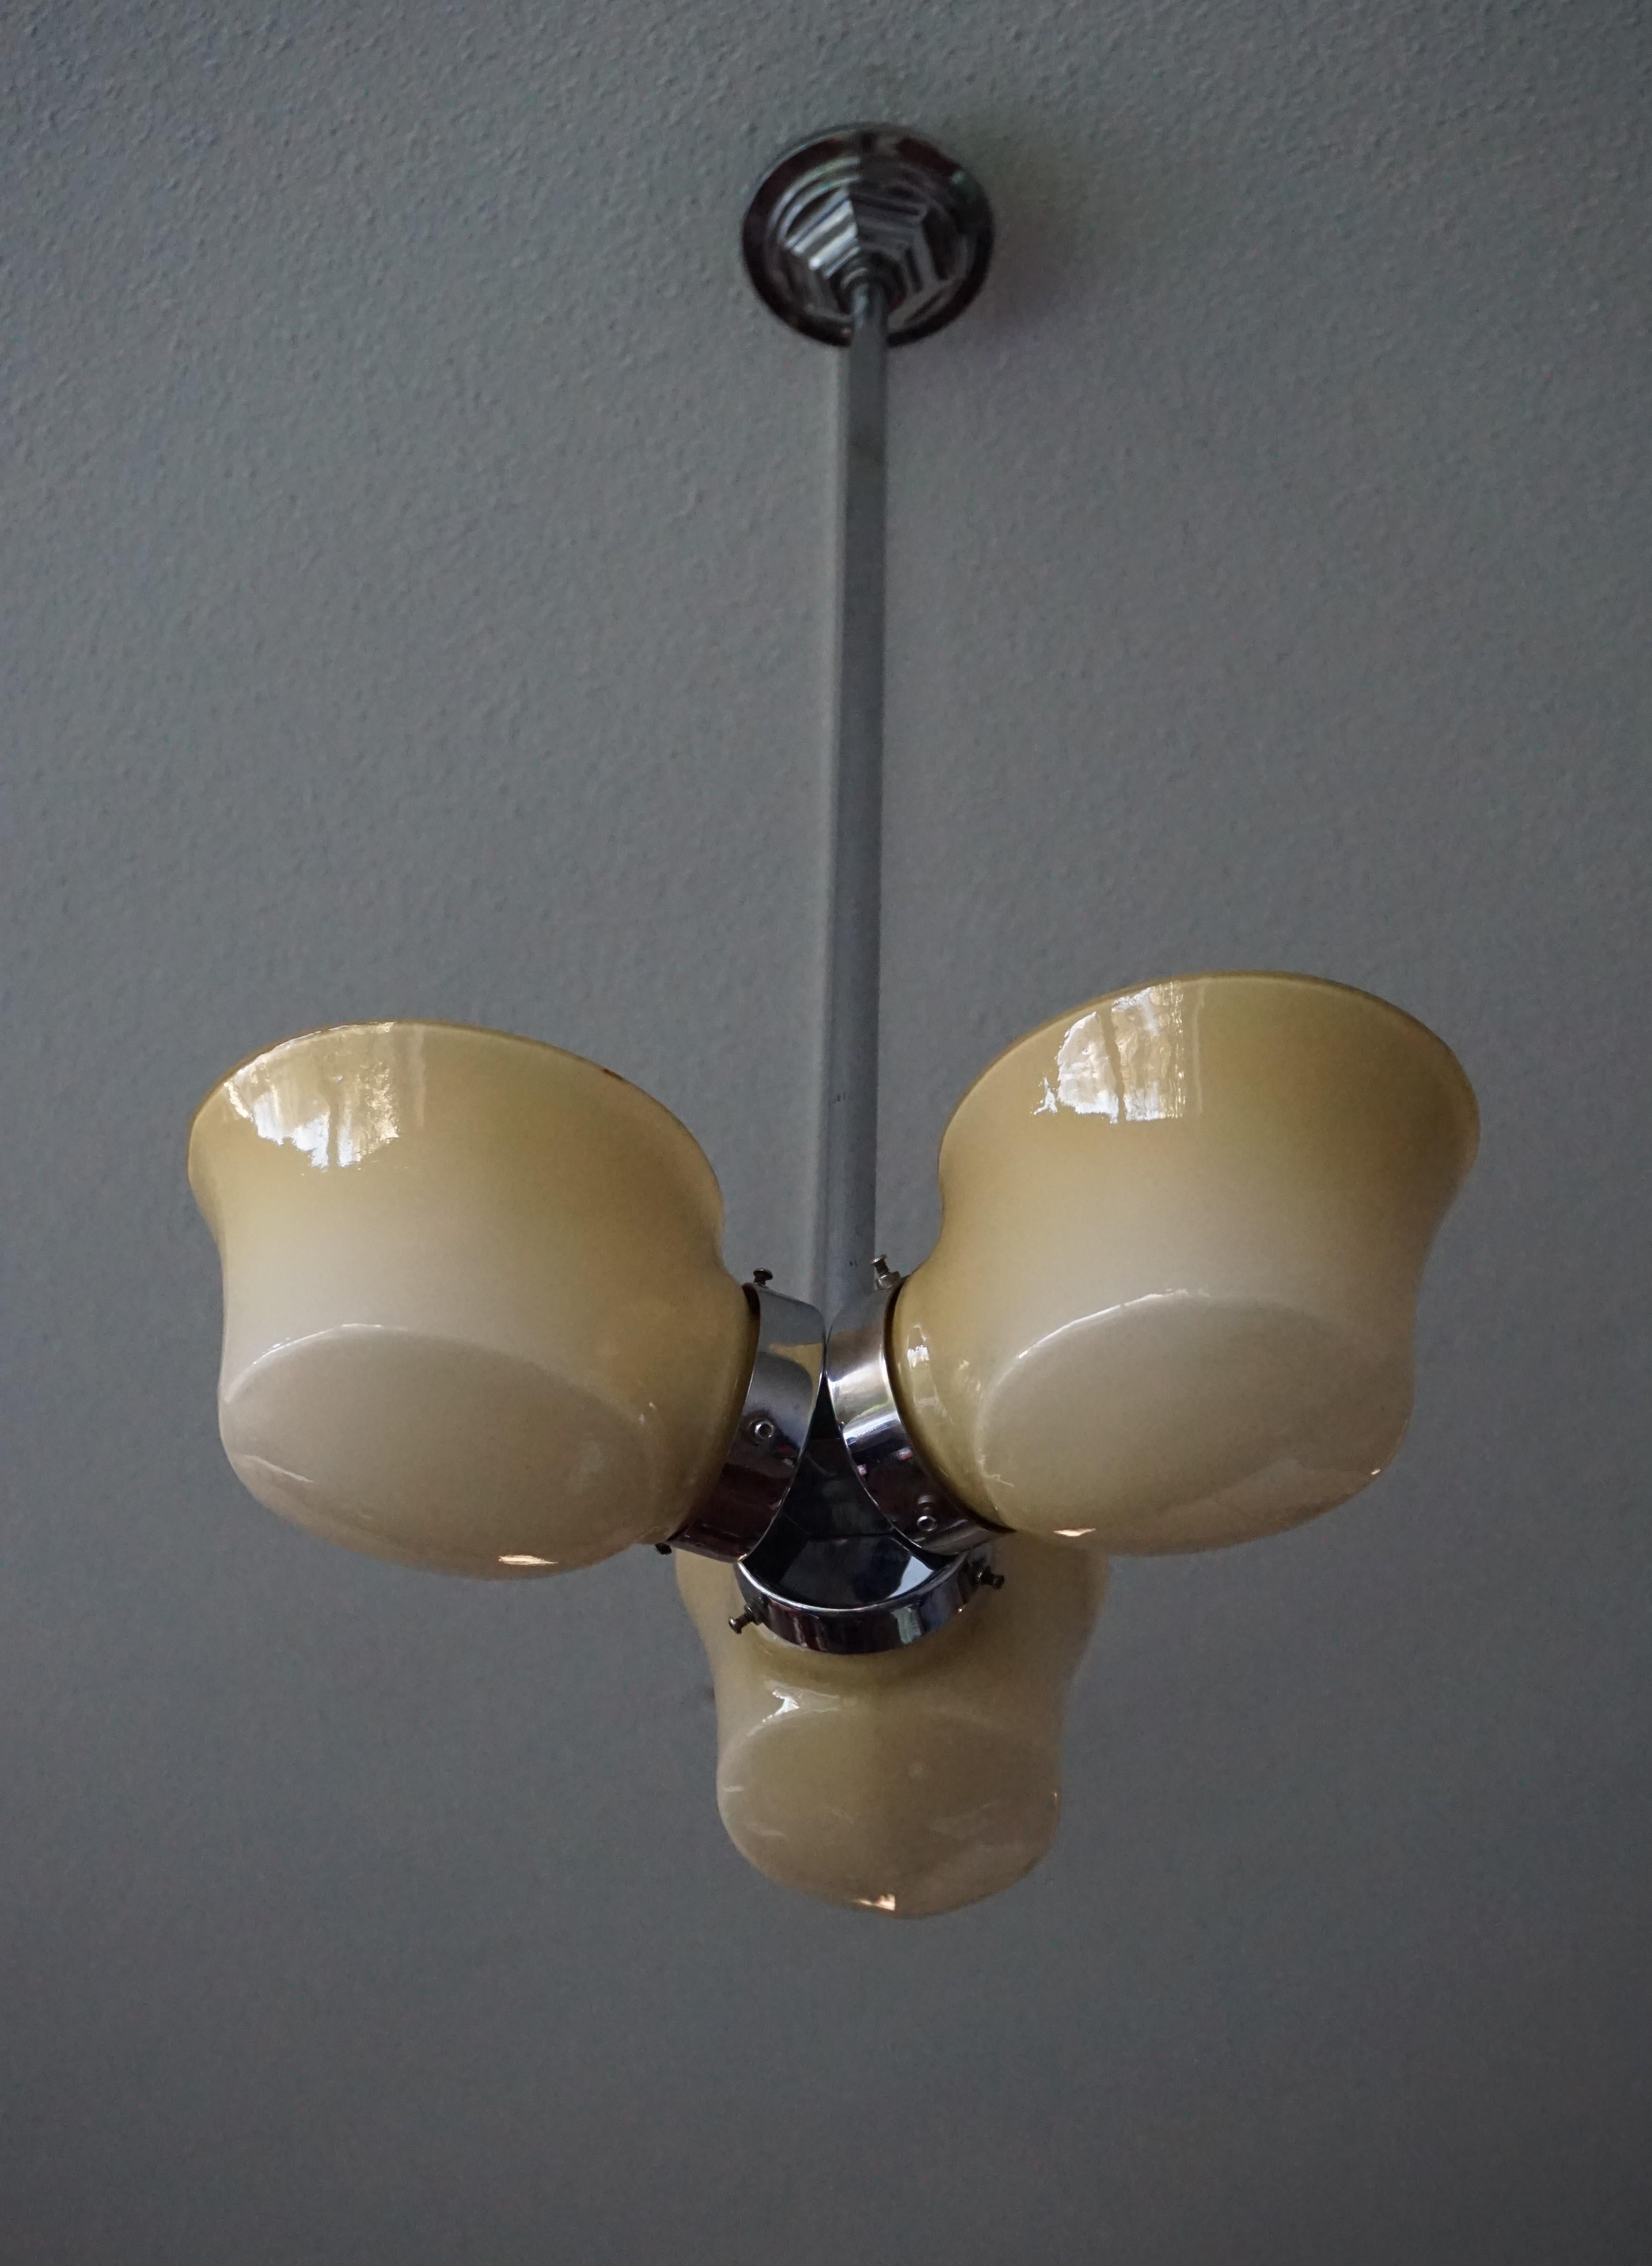 Rare and possibly unique Art Deco / modernist fixture.

We have been selling antique light fixtures for as long as we have had our business and we never stop being amazed by their aesthetic beauty, the quality of the materials and the way these